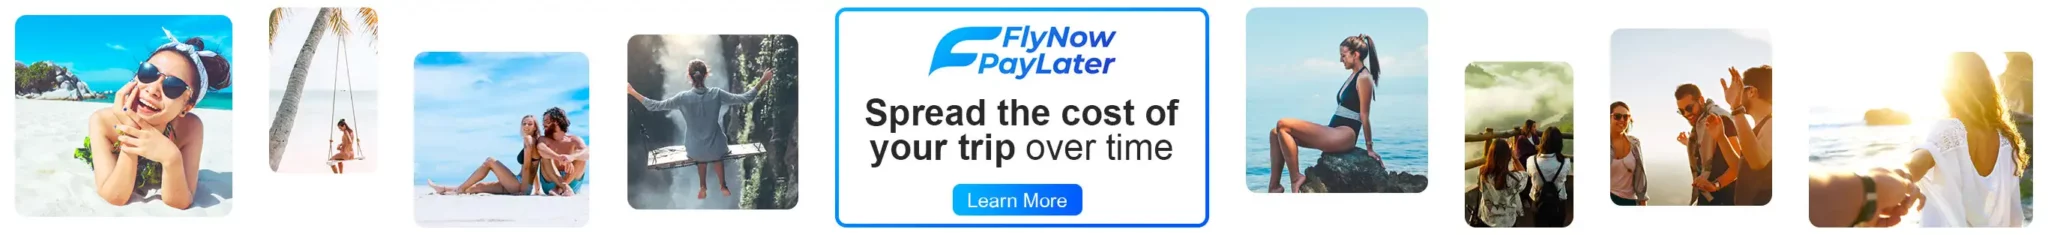 flynowpaylater